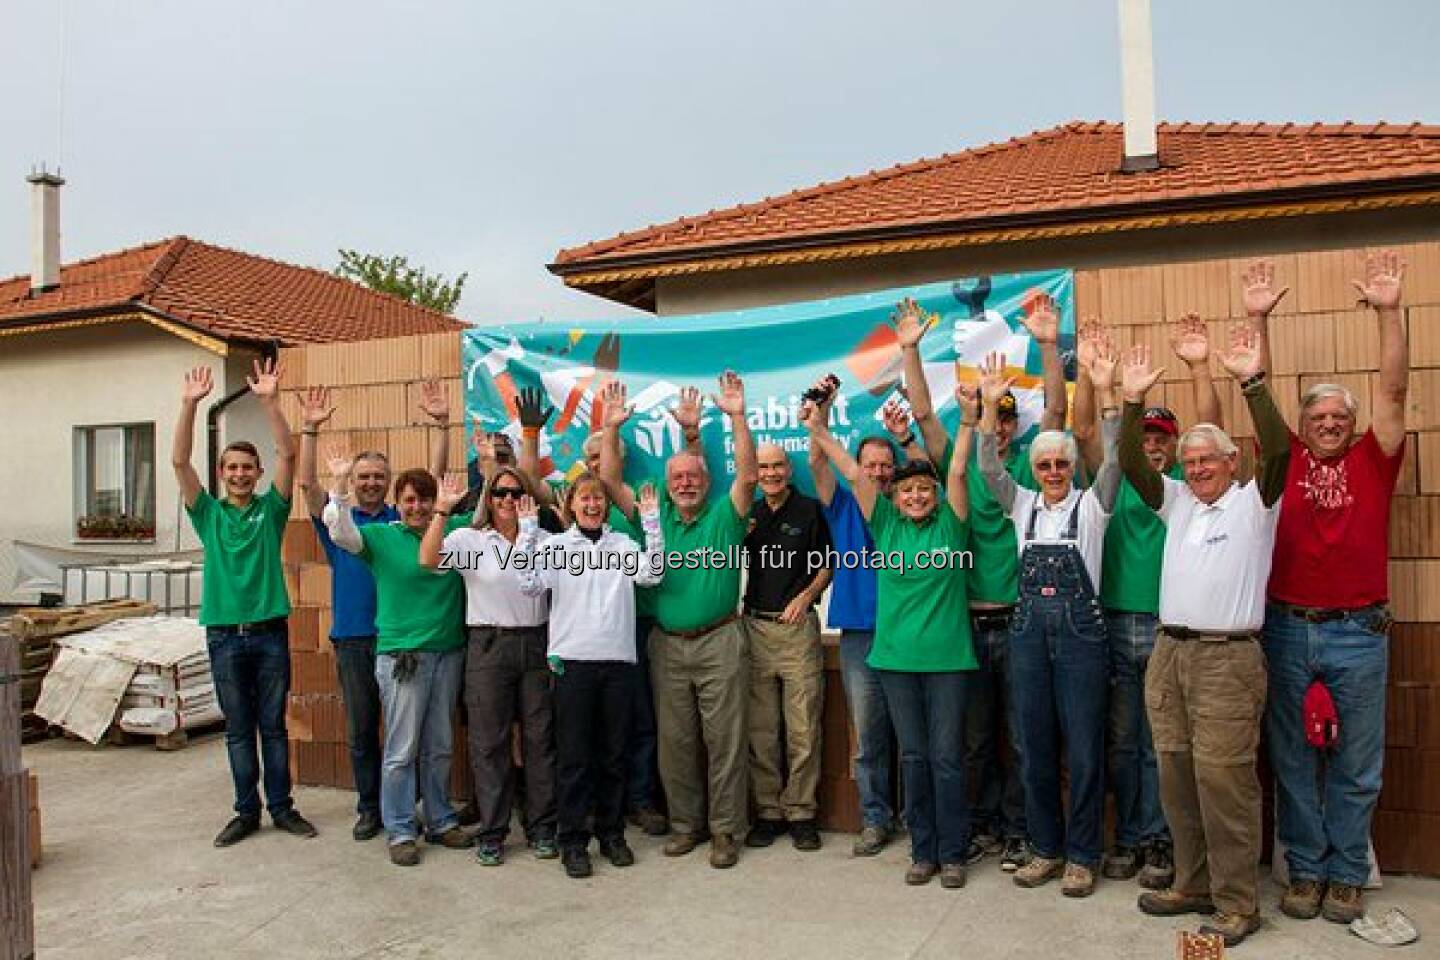 Wienerberger : 50 volunteers gathered to celebrate World Habitat Day in Bulgaria; together they built a house for a family in need http://twitter.com/wienerberger/status/710043418530062336/photo/1  Source: http://facebook.com/wienerberger